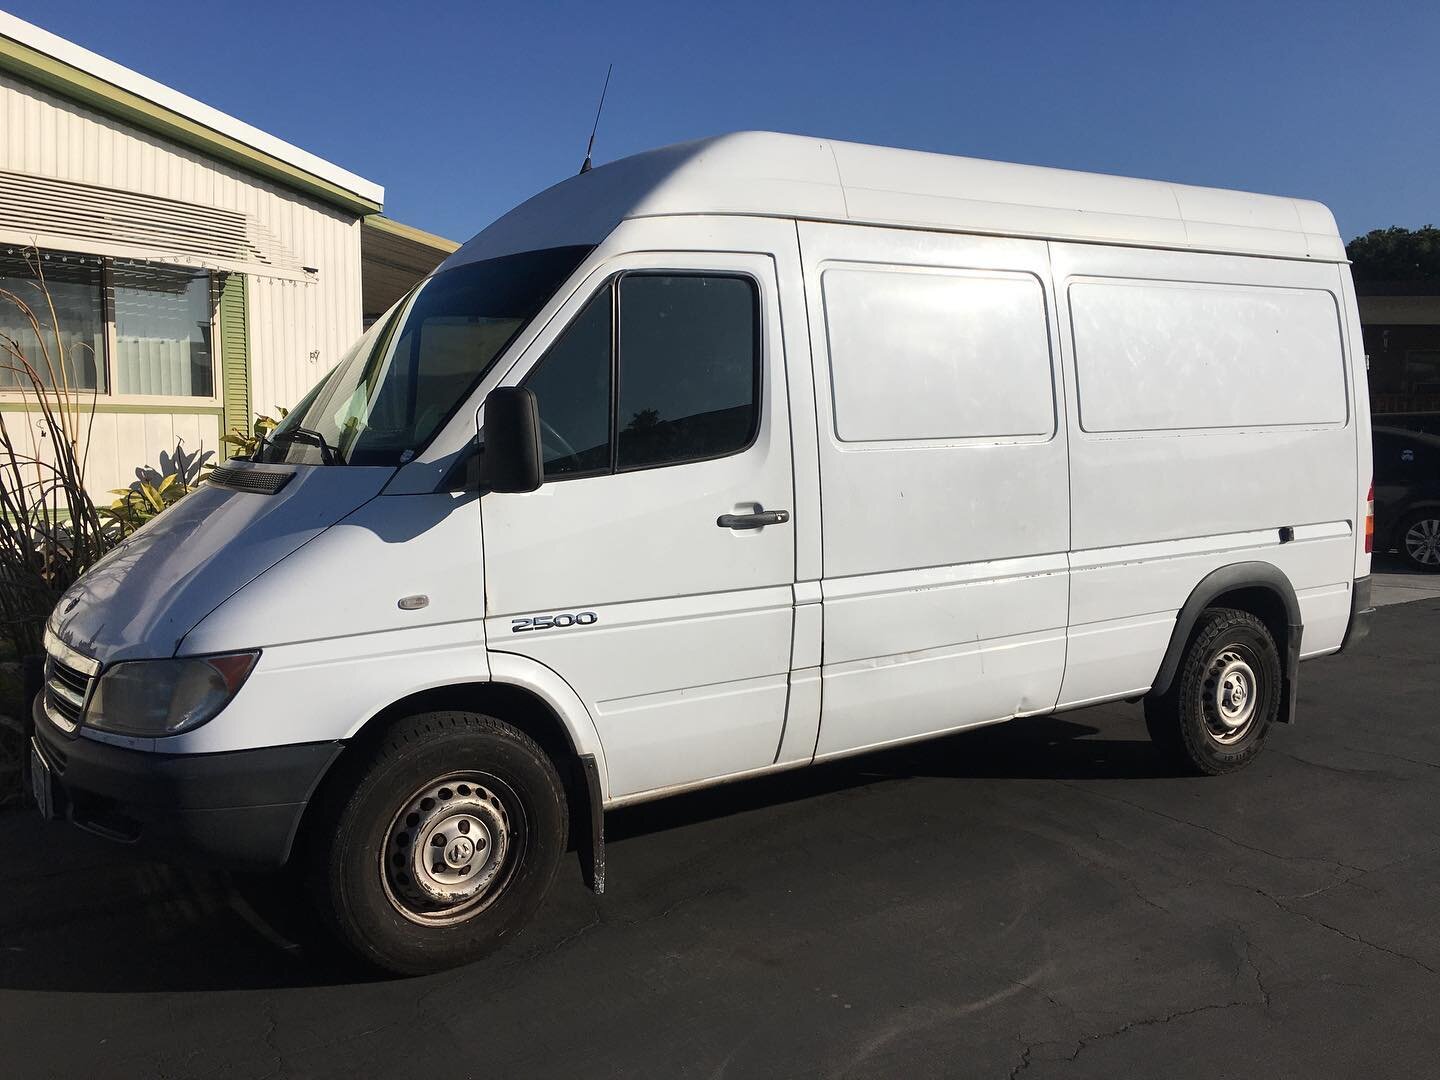 Before | After Build of our T1N Simple Conversions Build. Have an old sprinter or van? We have the parts or even a list for your build today. This one is equipped with solar, power, fan, storage, insulation, lighting, off-road tires, and all the good